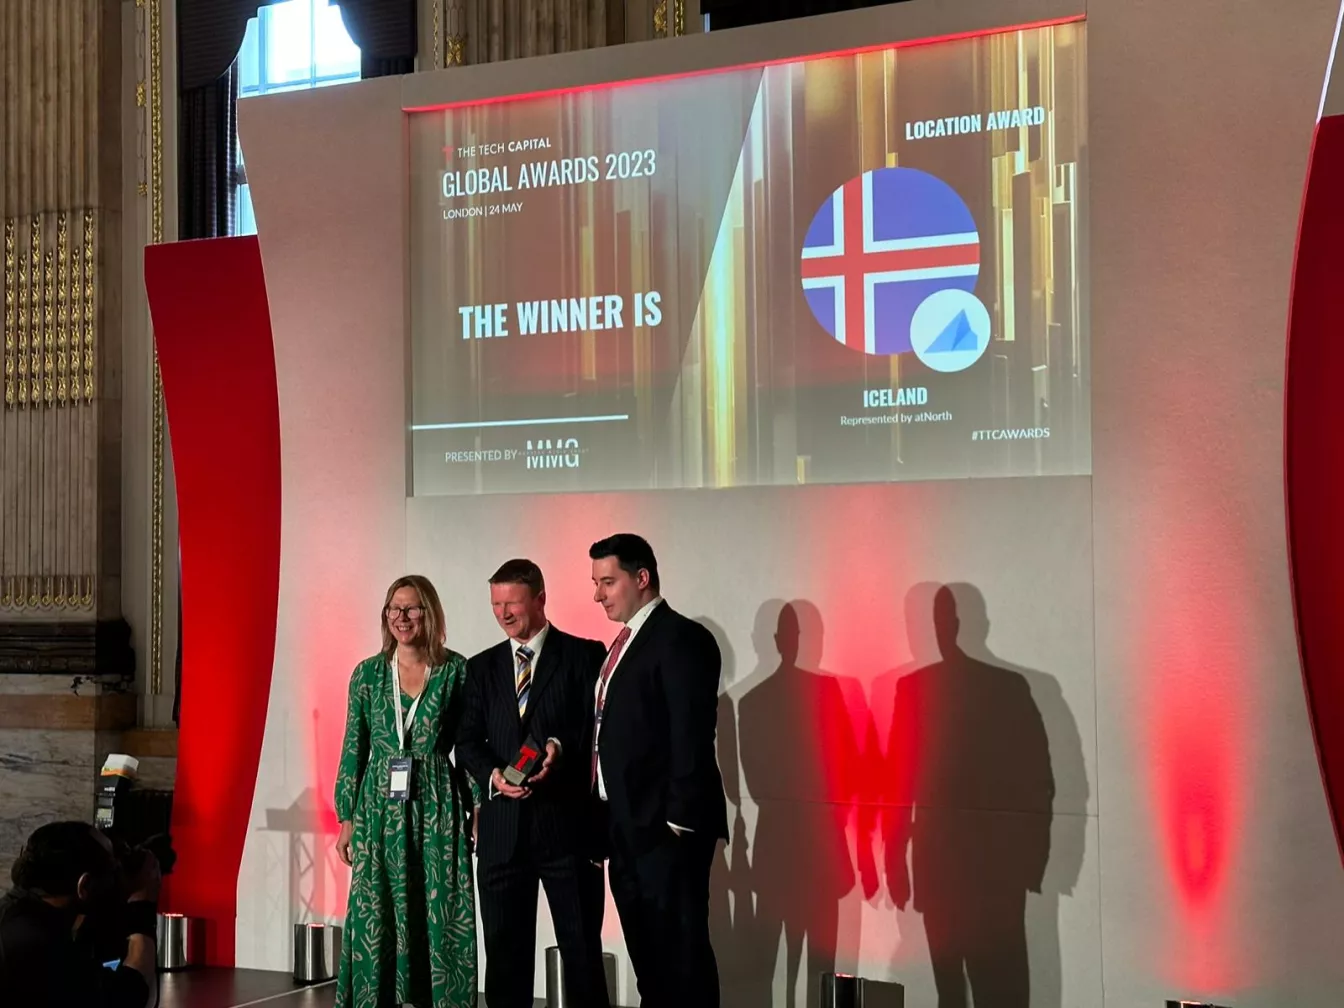 atNorth's Sales Director - UK, David Sandars accepting the award from The Tech Capital team